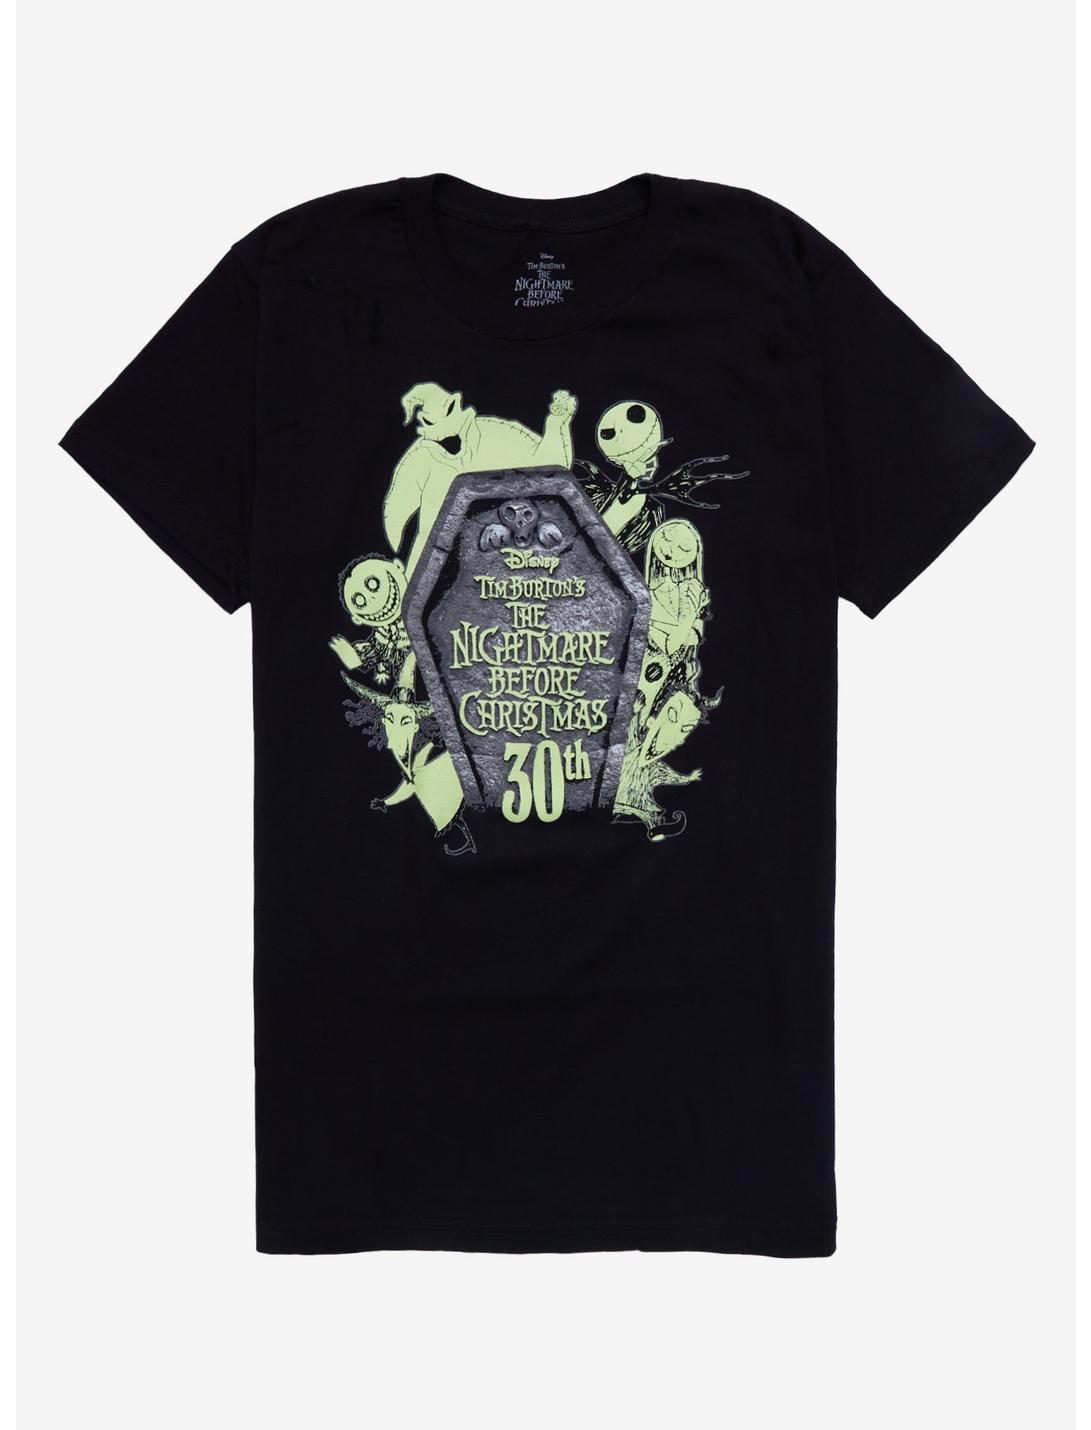 The Nightmare Before Christmas 30th Anniversary Glow-In-The-Dark Tombstone T-Shirt Hot Topic Exclusive, BLACK, hi-res